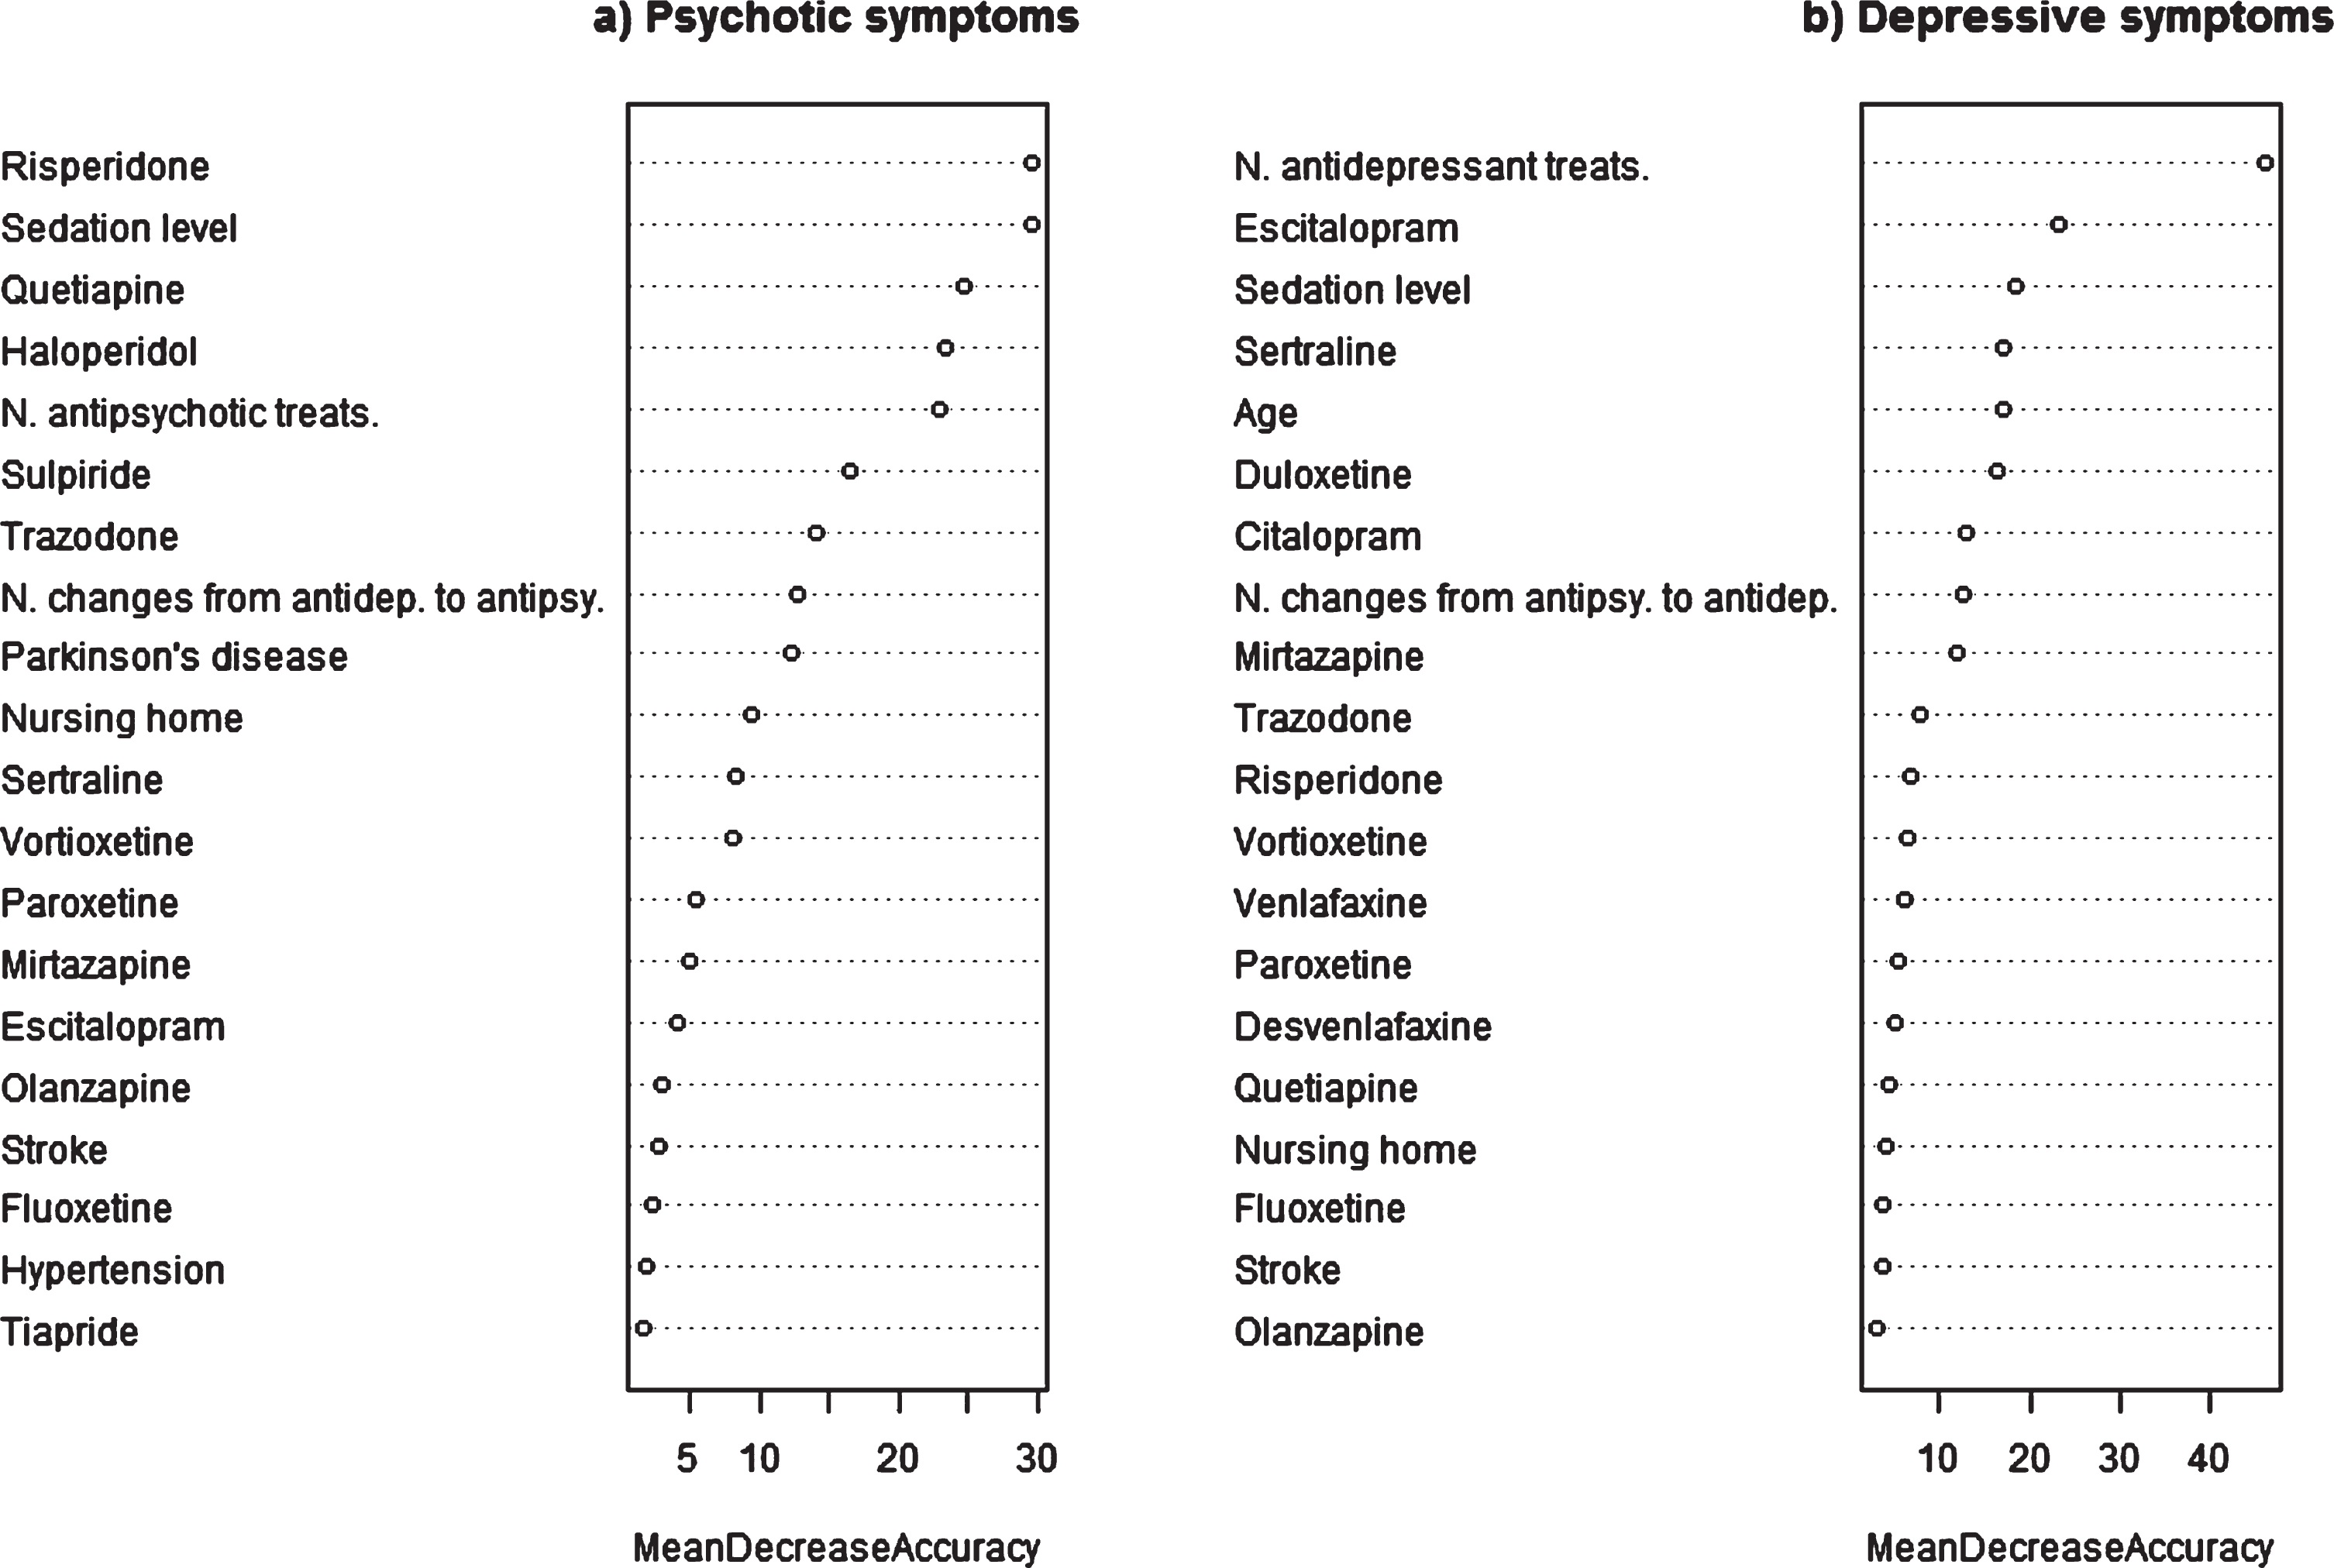 Importance of variables in selected models predicting psychotic and depressive symptoms.